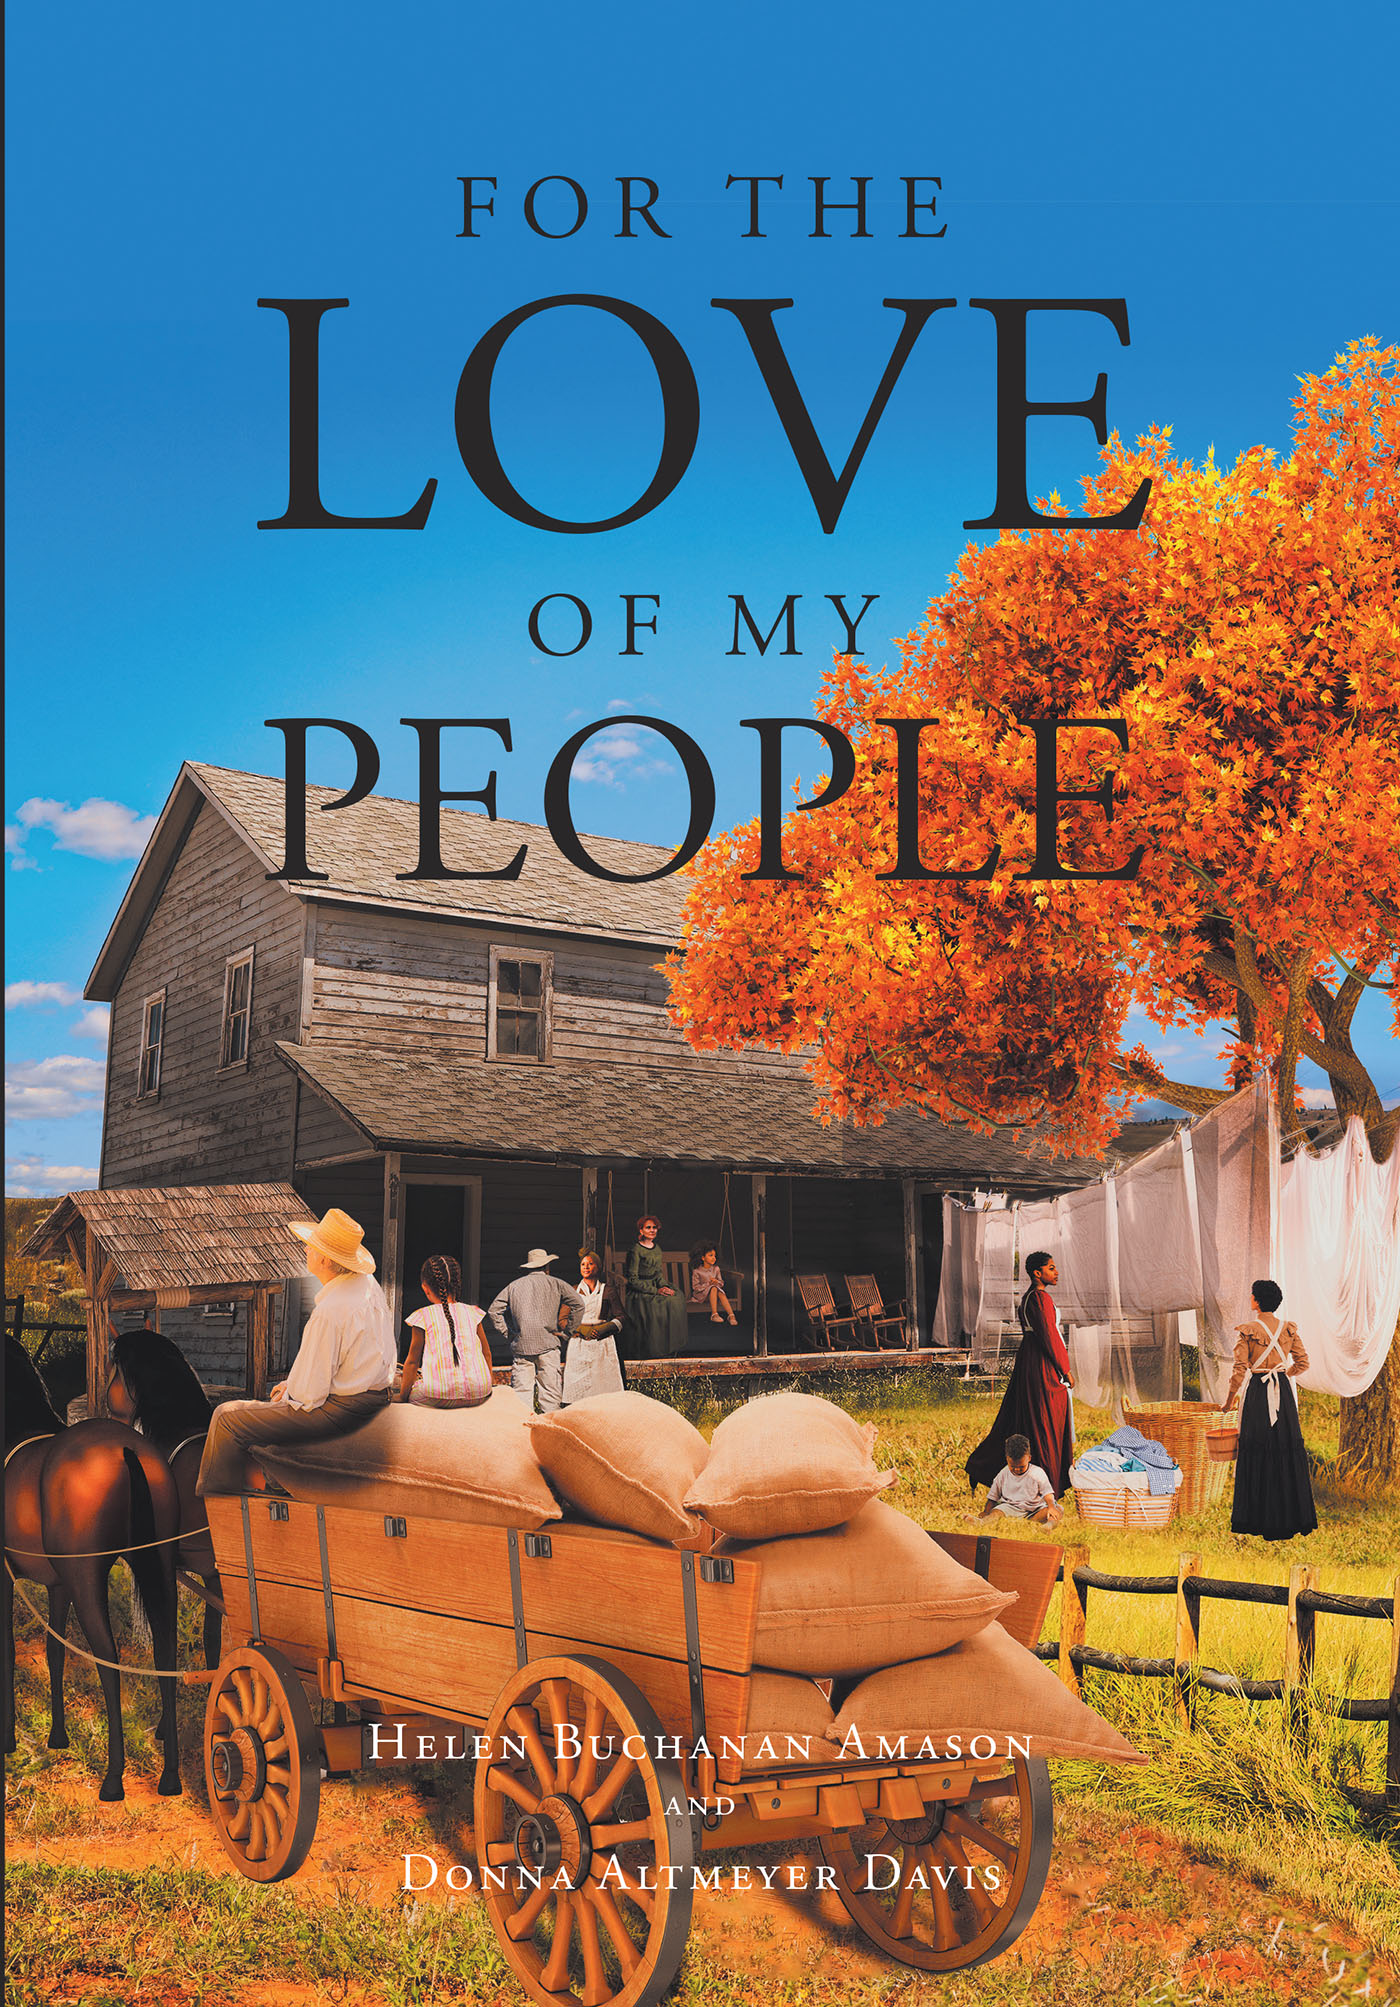 Authors Helen Buchanan Amason and Donna Altmeyer Davis’s New Book, "For the Love of My People," is an Enthralling Work of Christian Historical Fiction